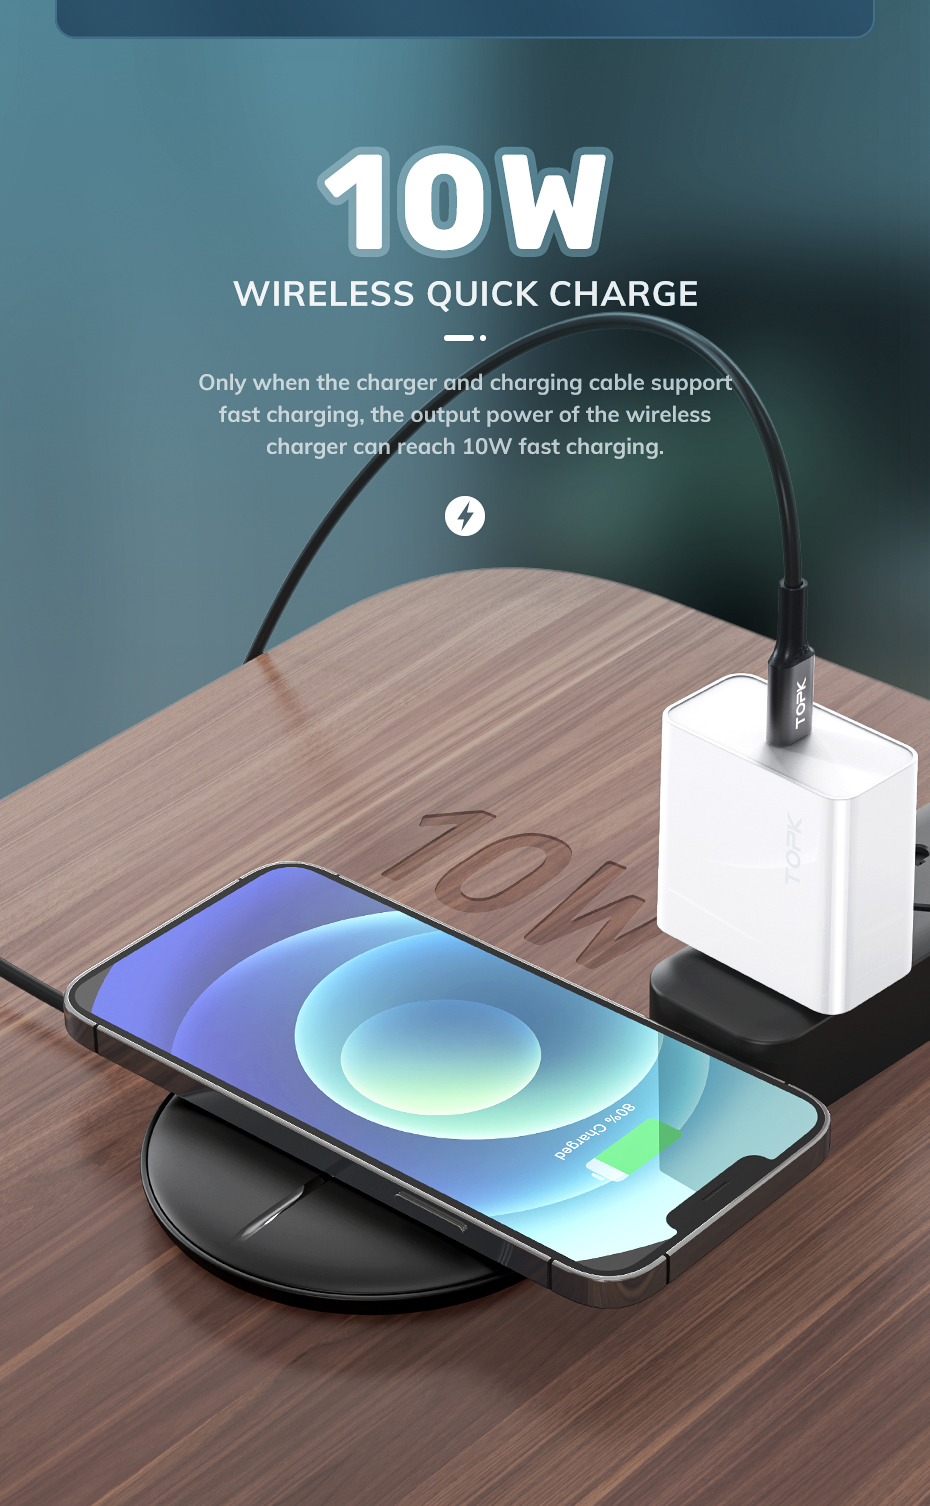 TOPK-B09W-10W-75W-5W-Wireless-Charger-Fast-Wireless-Charging-Pad-For-Qi-enabled-Smart-Phones-For-iPh-1889022-2